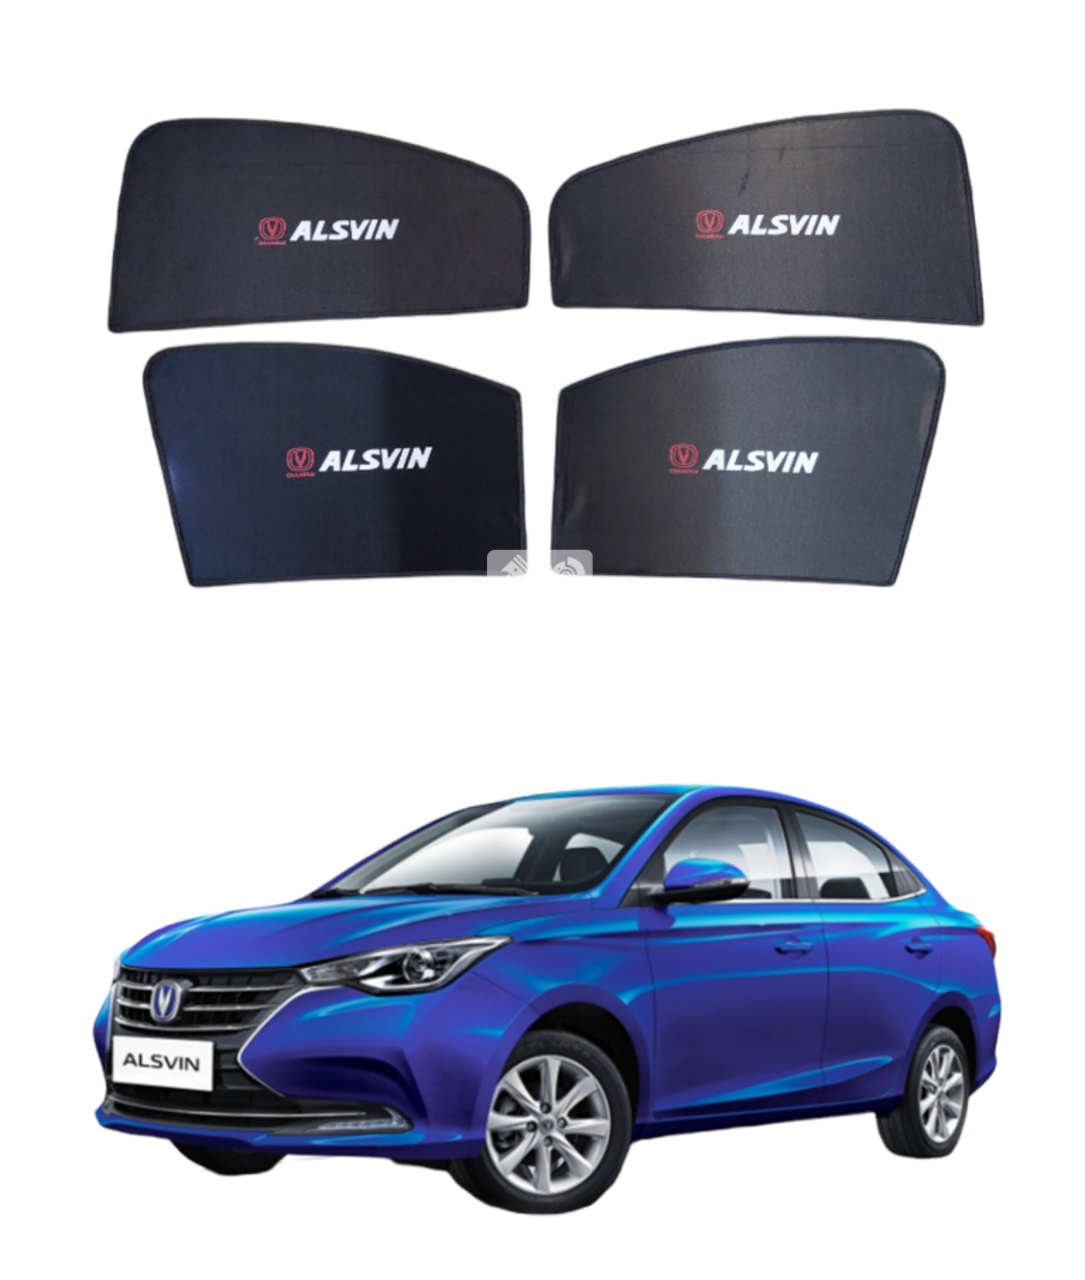 Picture of Changan Alsvin Sunshades Window Curtains Set (4 PCs) With Logo